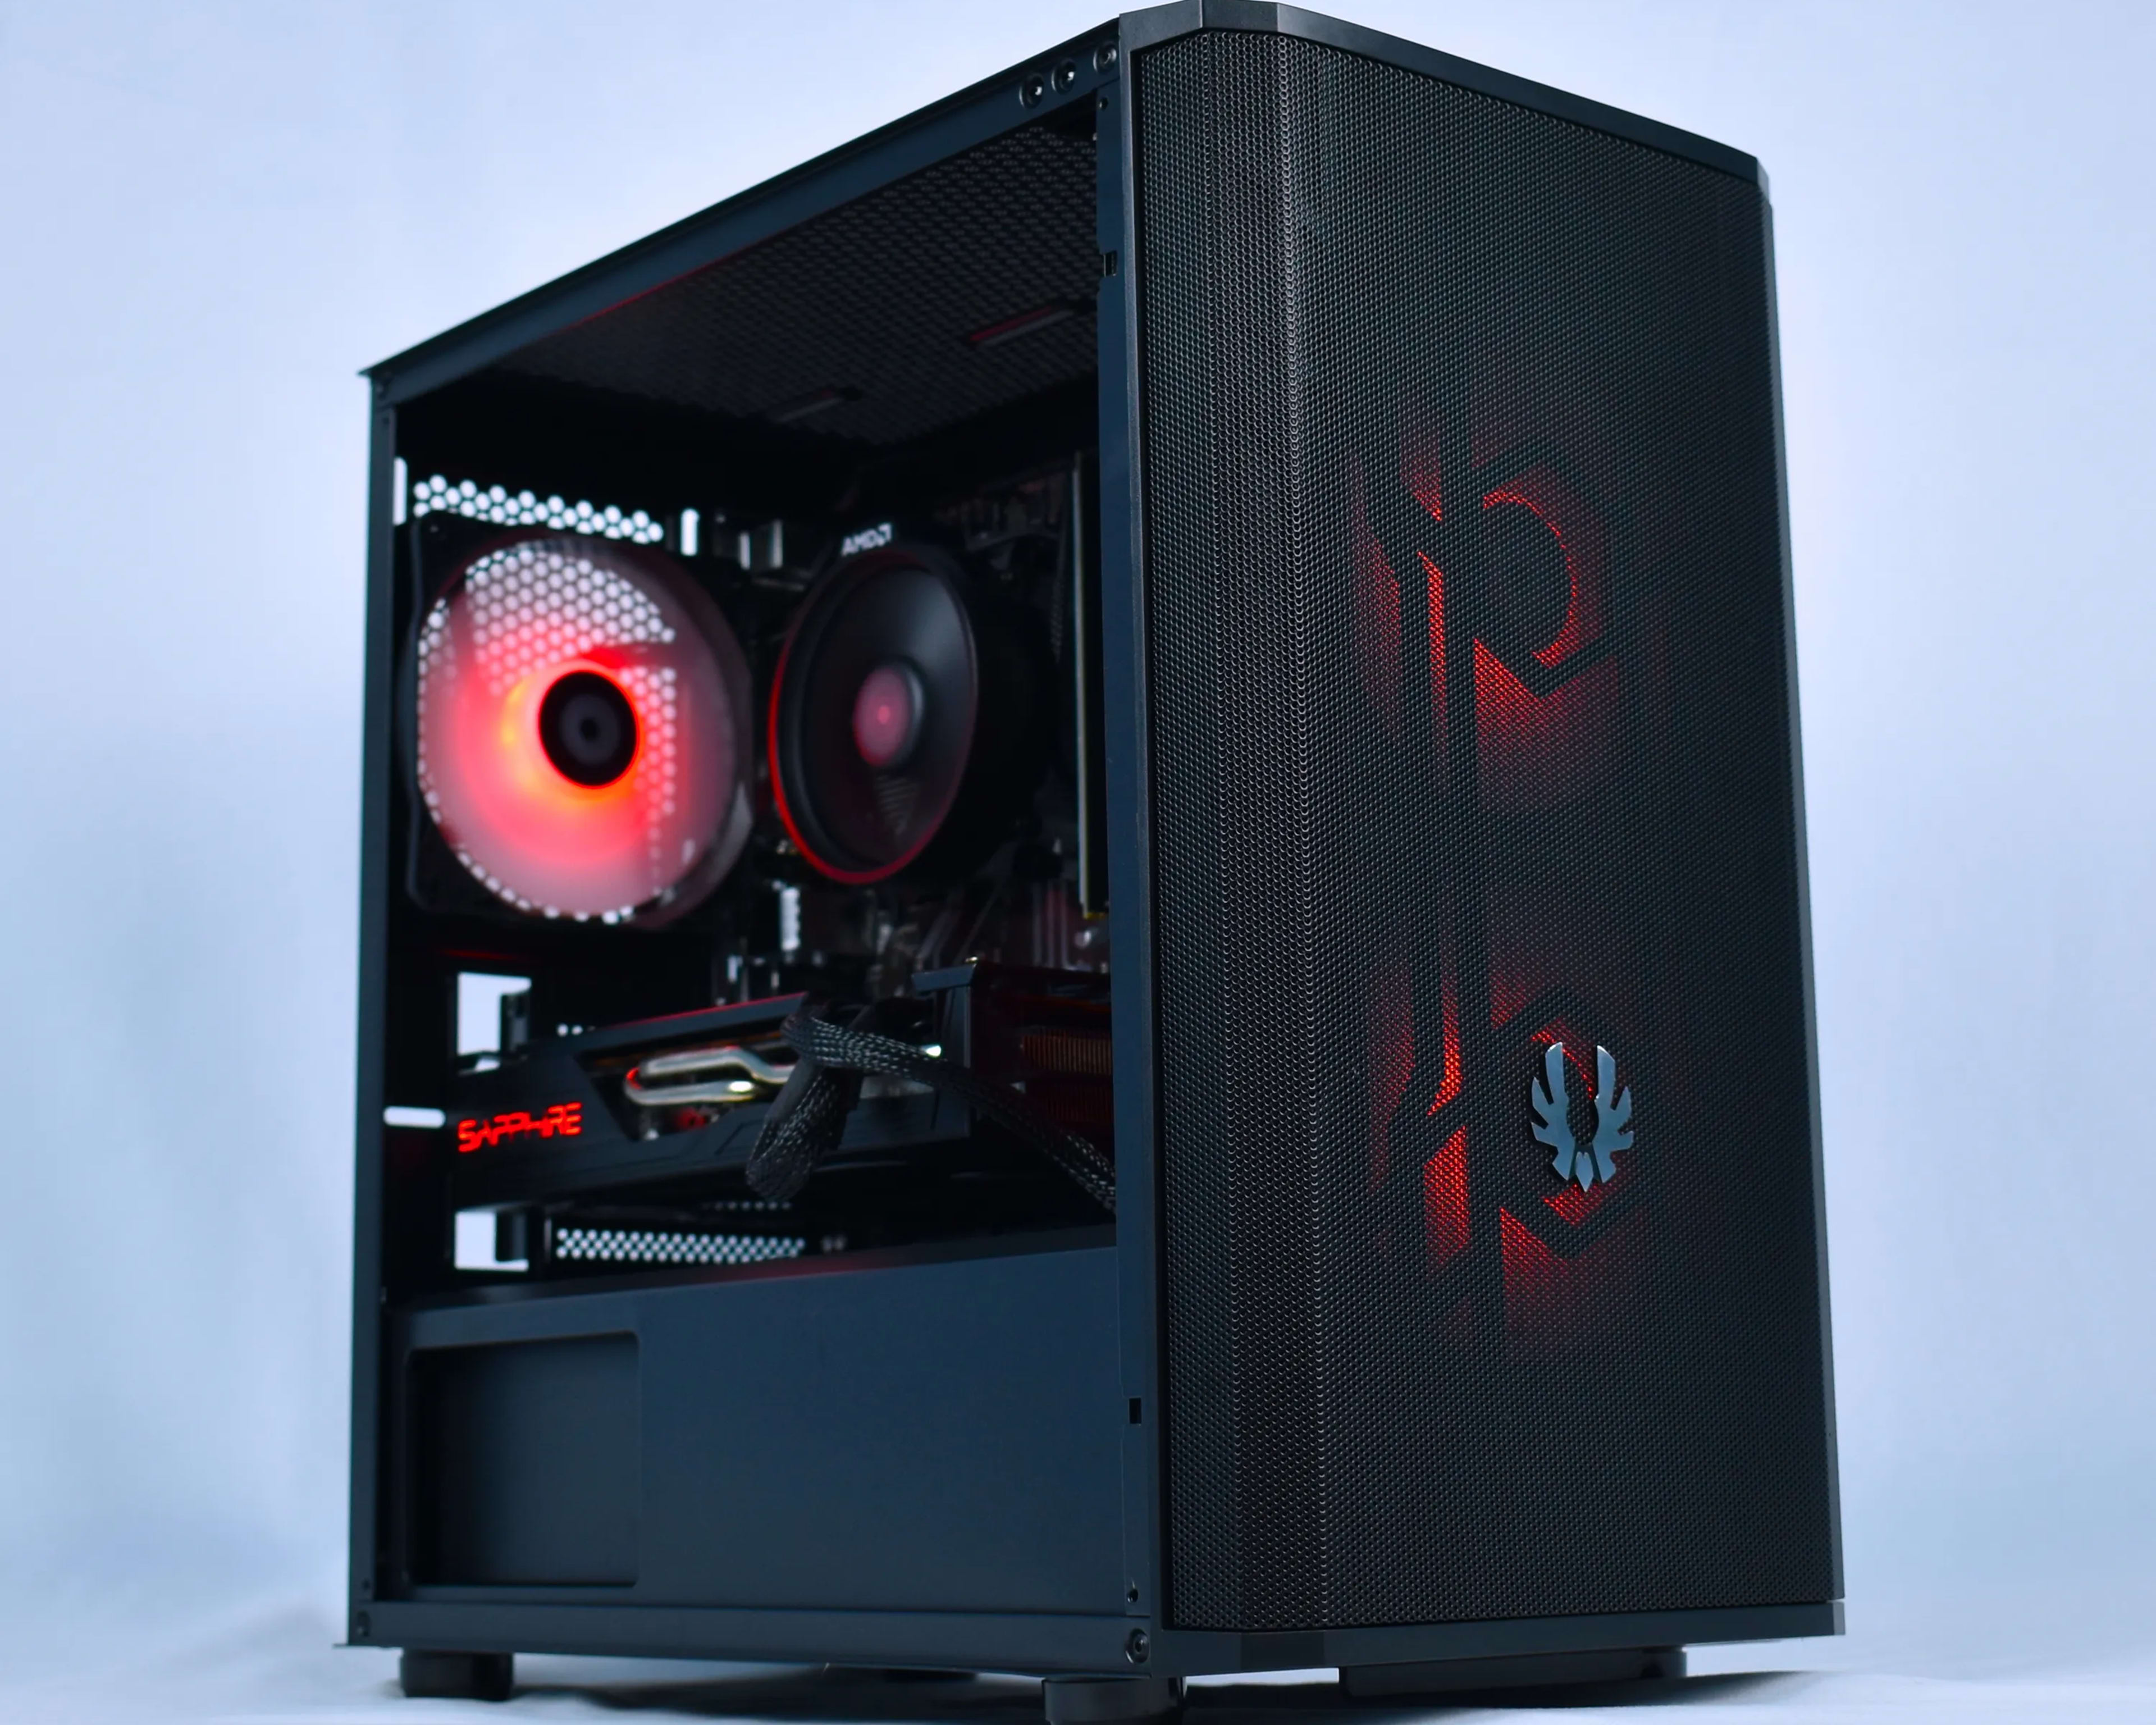 ULTIMATE VALUE Gaming/Streaming PC | Ryzen 5 3600, RX 5700XT, 1TB 